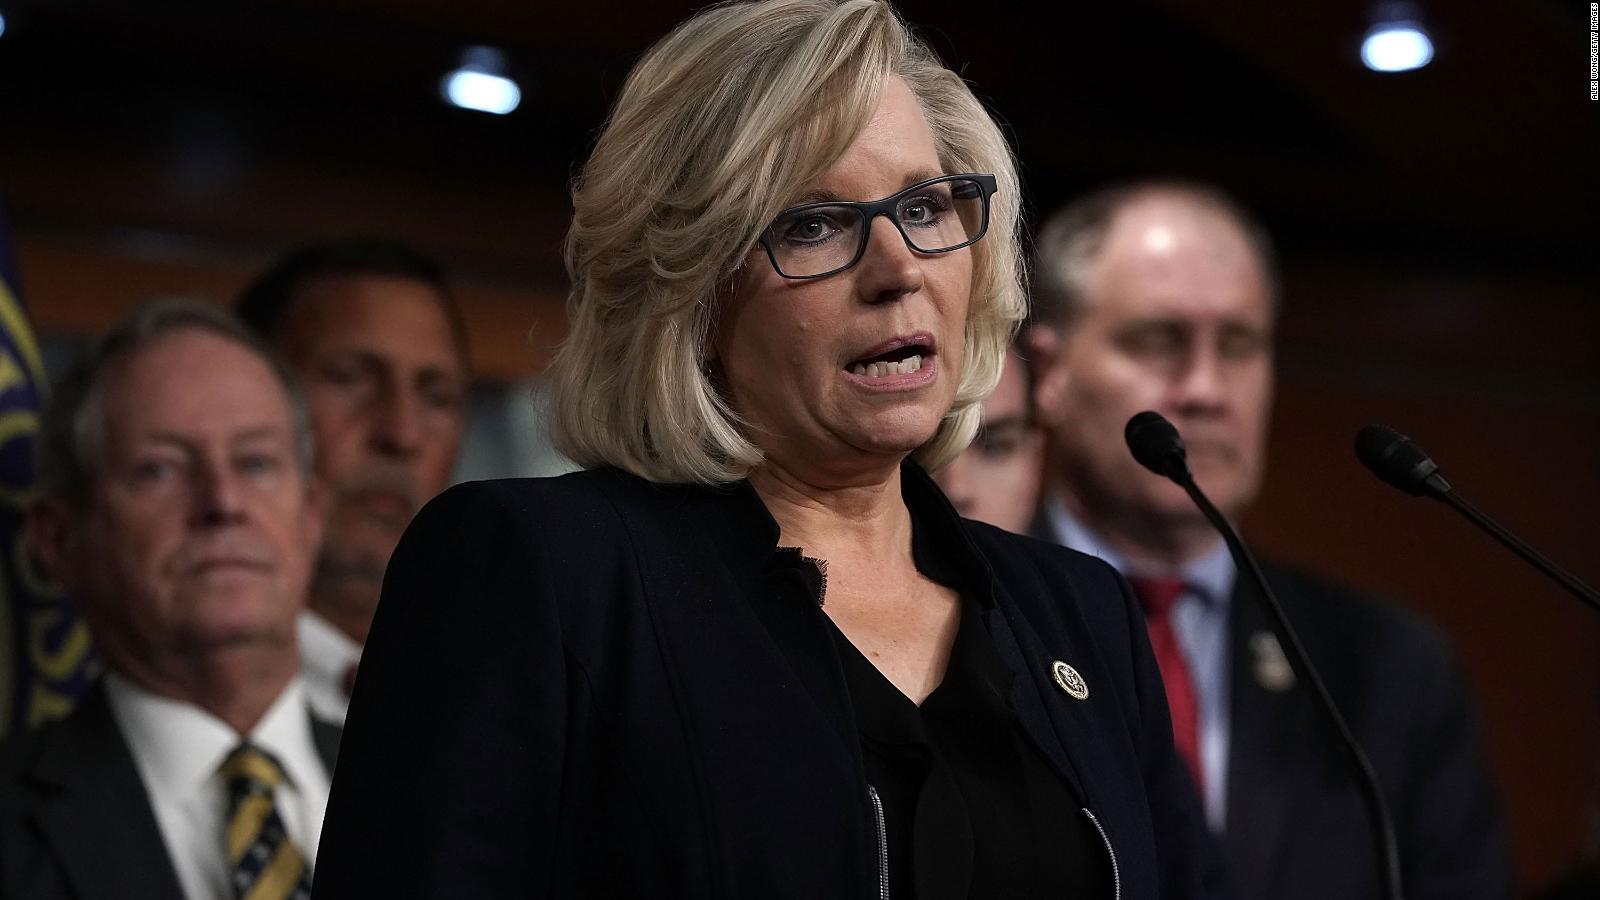 Liz Cheney shoring up GOP support behind the scenes ahead of crucial